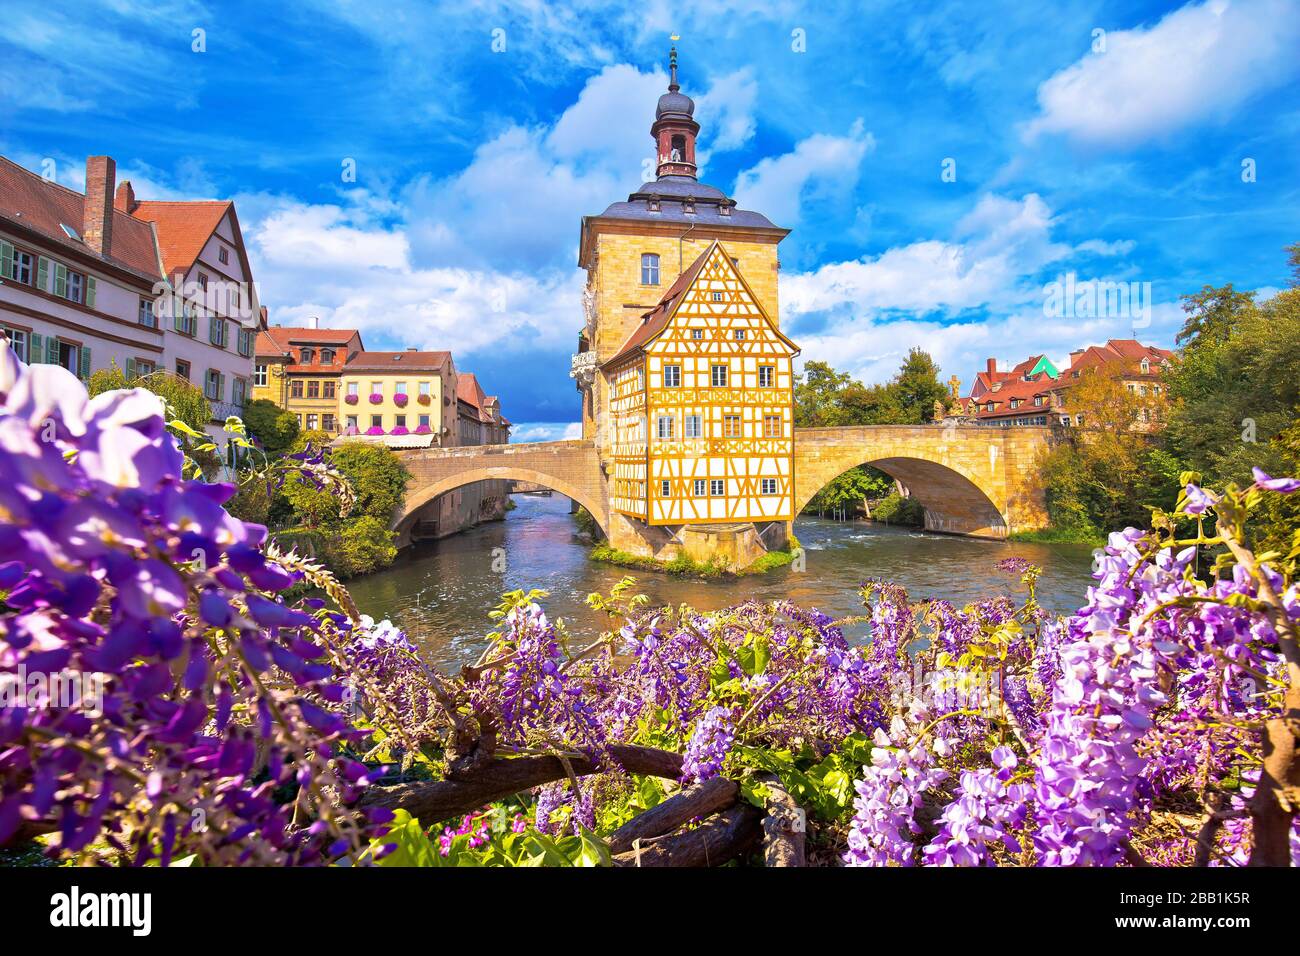 Scenic view of Old Town Hall of Bamberg (Altes Rathaus) with two bridges over the Regnitz river flower view,  Upper Franconia, Bavaria region of Germa Stock Photo